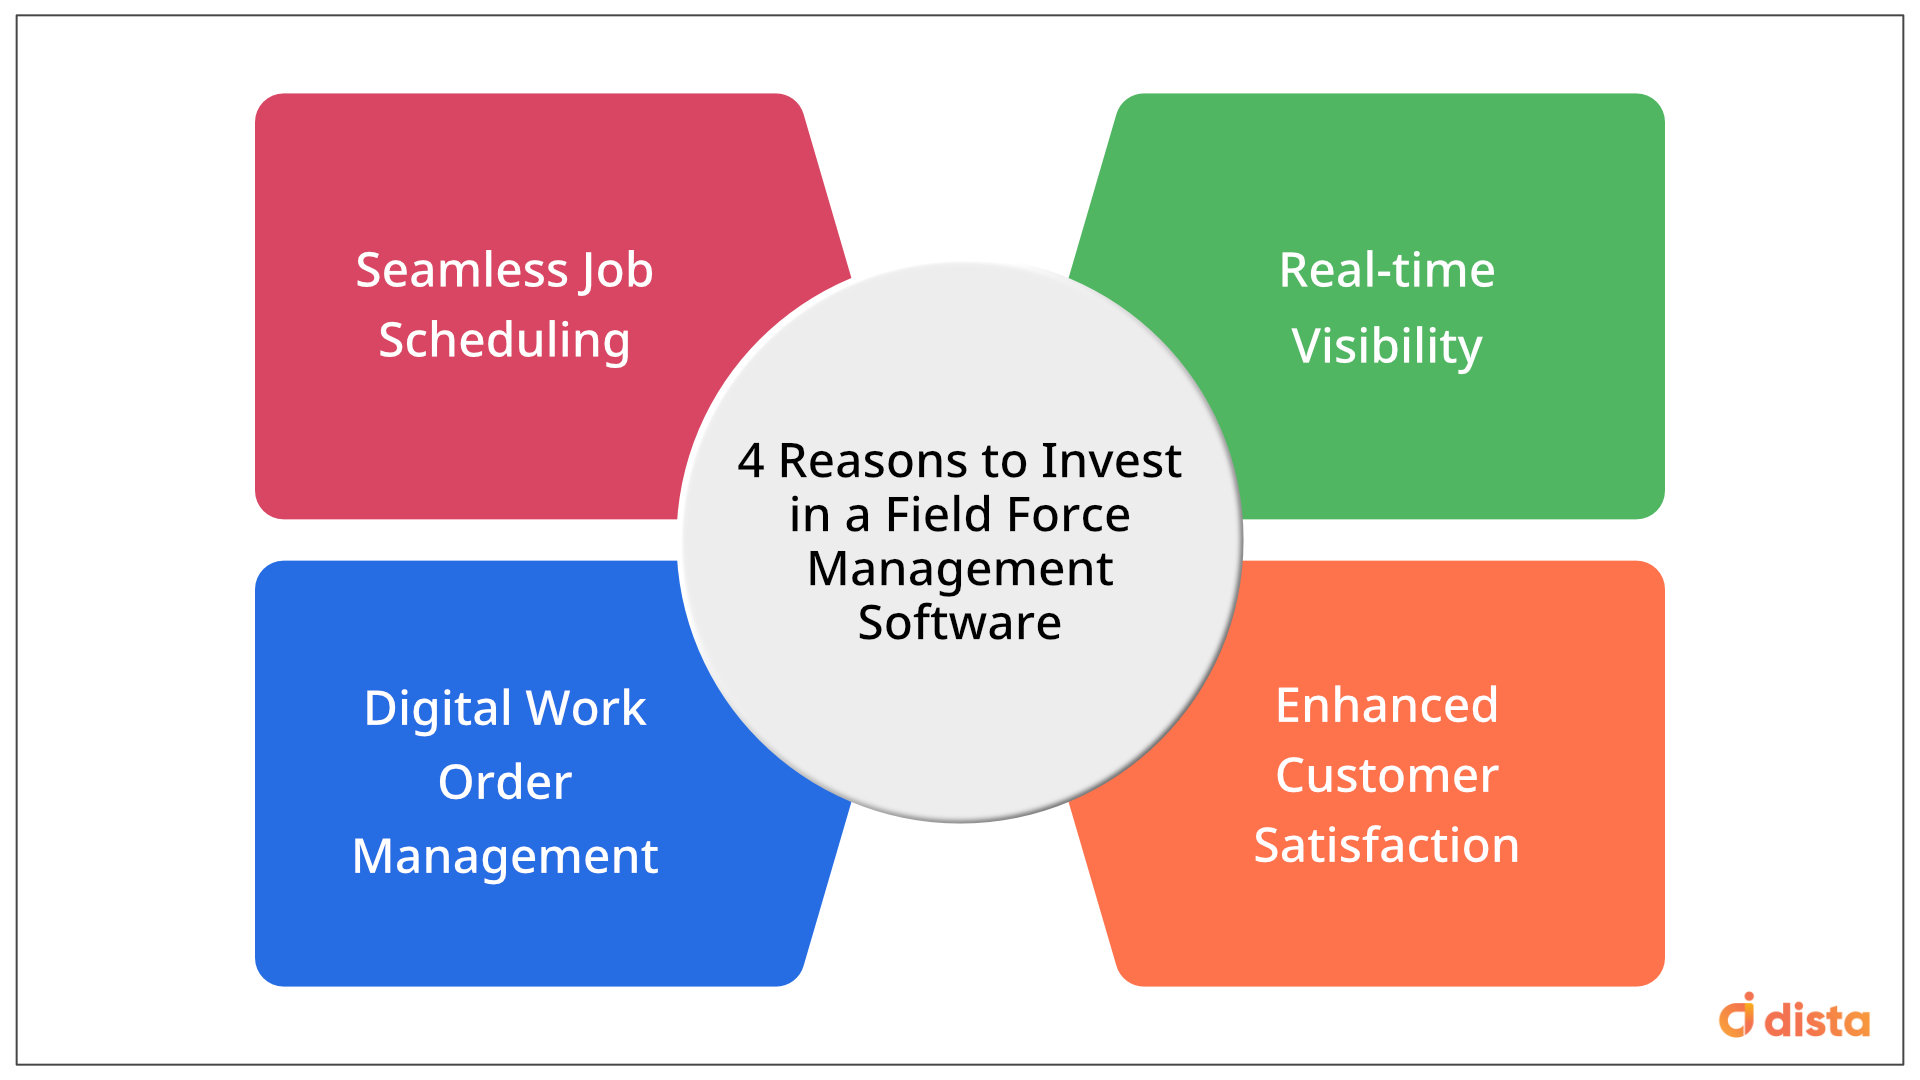 4 Reasons to Invest in a Field Force Management Software